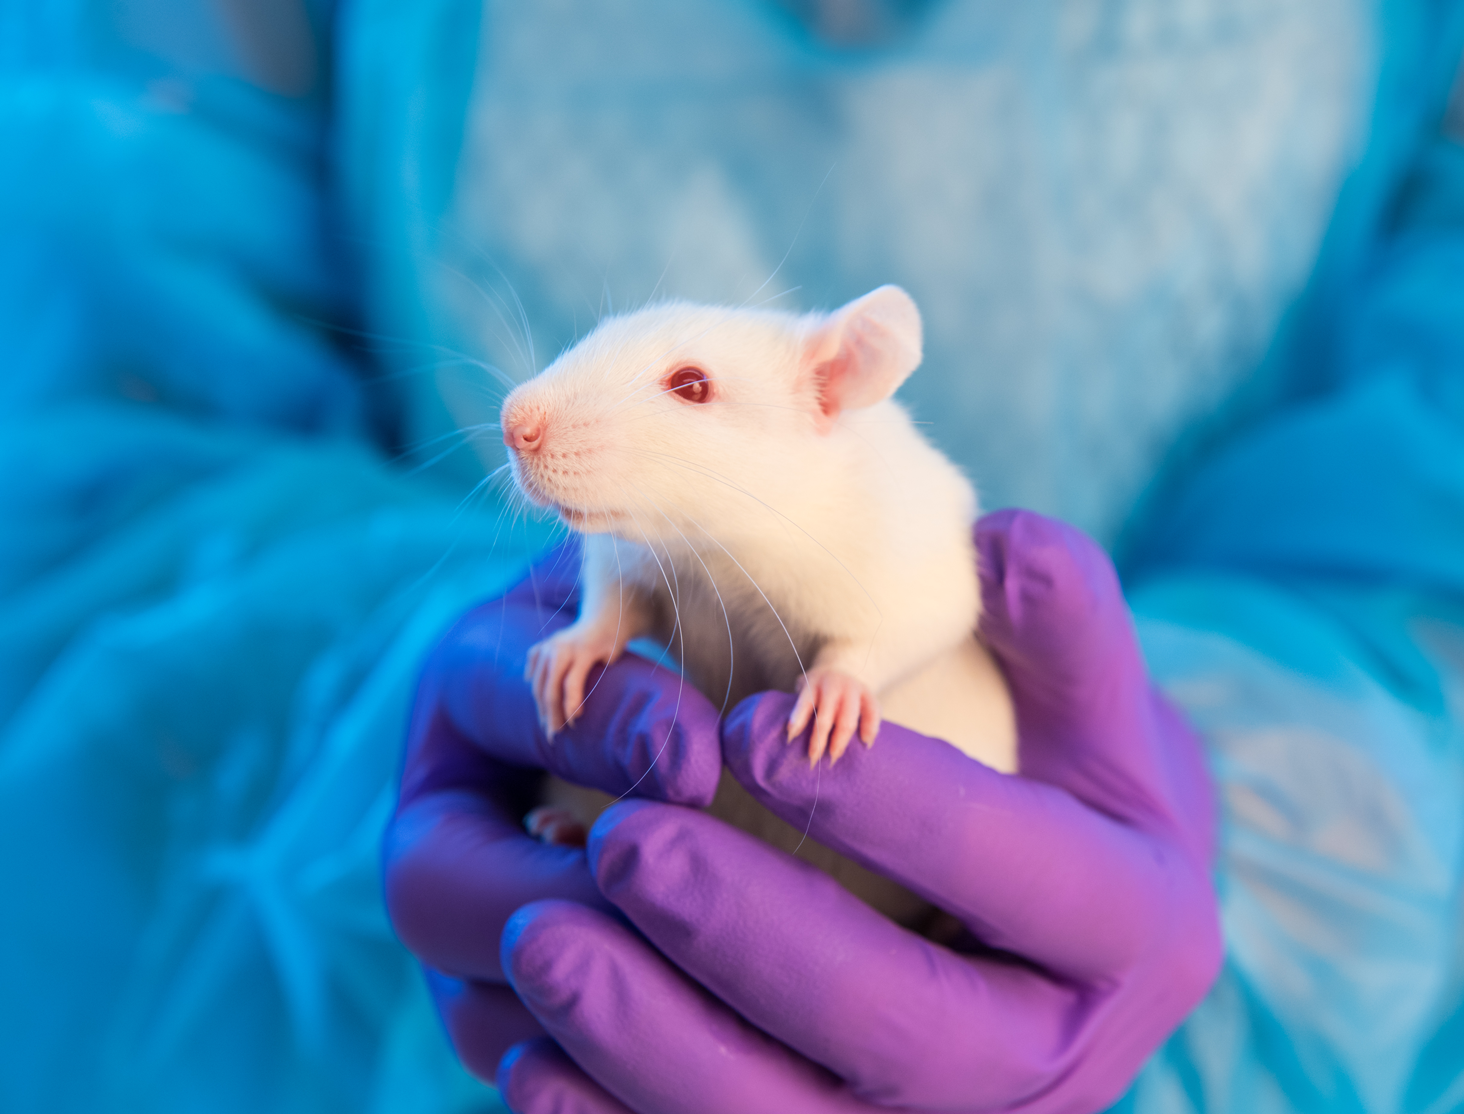 Researcher donning personal protective equipment holds white rat